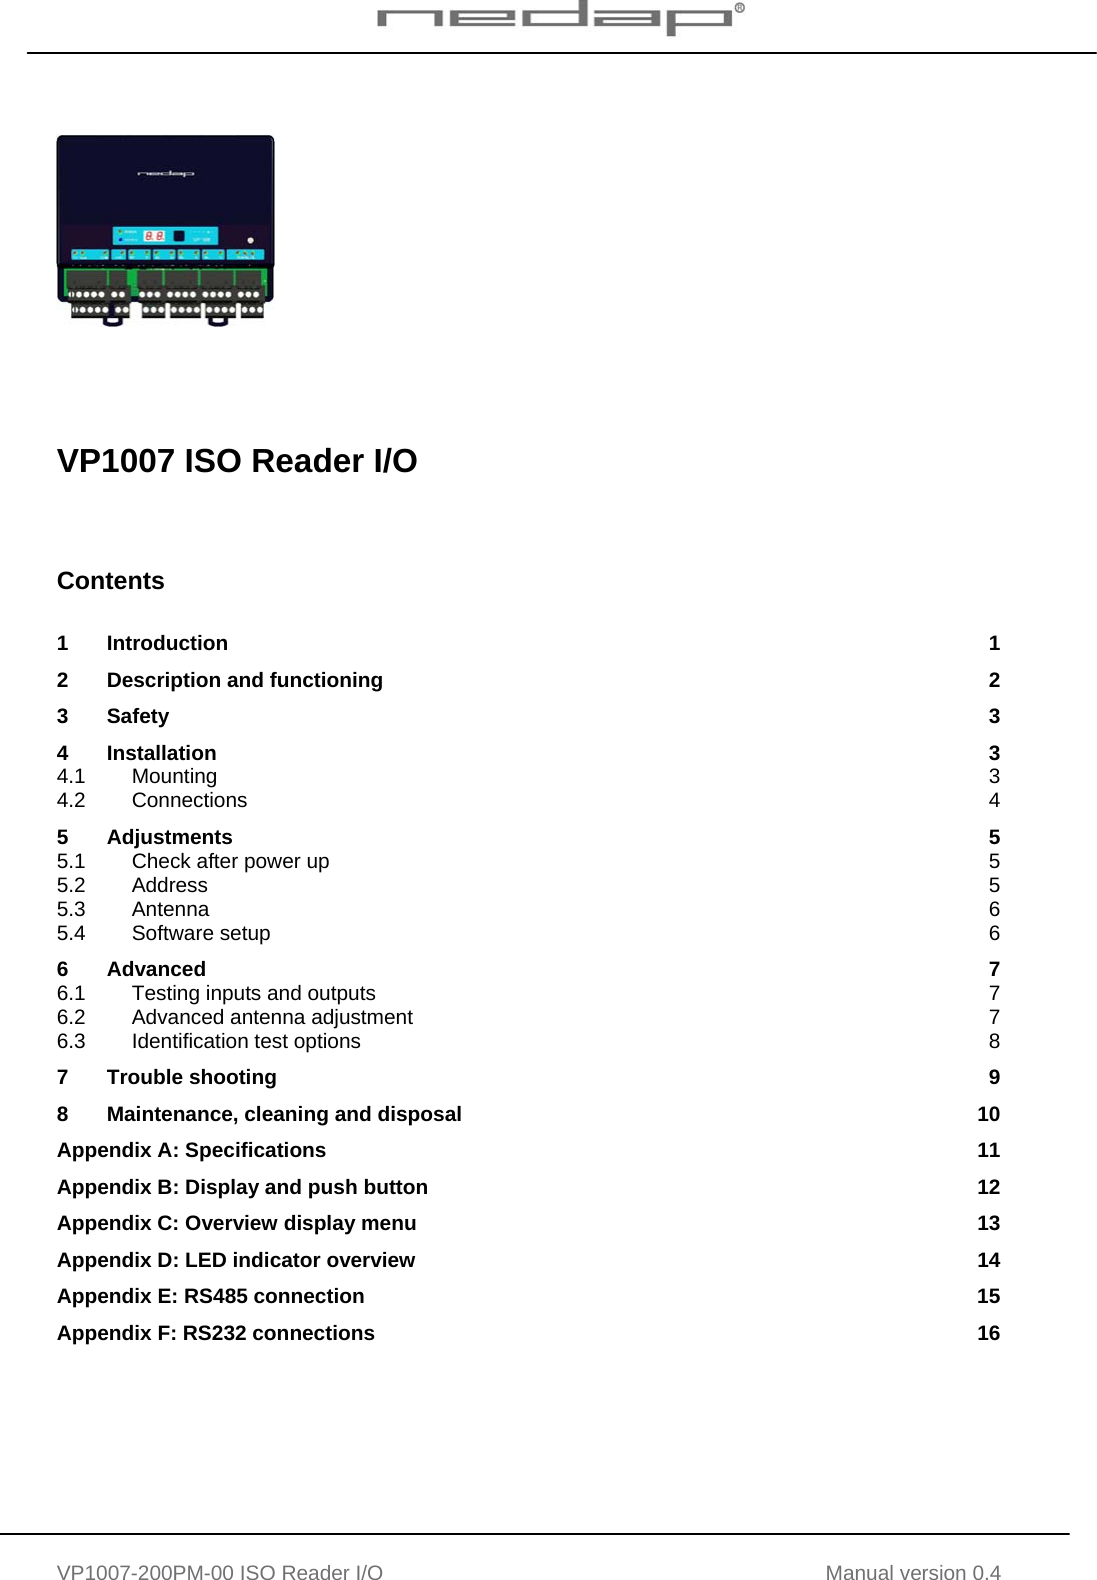   VP1007-200PM-00 ISO Reader I/O Manual version 0.4          VP1007 ISO Reader I/O     Contents  1 Introduction  1 2 Description and functioning  2 3 Safety  3 4 Installation  3 4.1 Mounting  3 4.2 Connections  4 5 Adjustments  5 5.1 Check after power up  5 5.2 Address  5 5.3 Antenna  6 5.4 Software setup  6 6 Advanced  7 6.1 Testing inputs and outputs  7 6.2 Advanced antenna adjustment  7 6.3 Identification test options  8 7 Trouble shooting  9 8 Maintenance, cleaning and disposal  10 Appendix A: Specifications  11 Appendix B: Display and push button  12 Appendix C: Overview display menu  13 Appendix D: LED indicator overview  14 Appendix E: RS485 connection  15 Appendix F: RS232 connections  16     